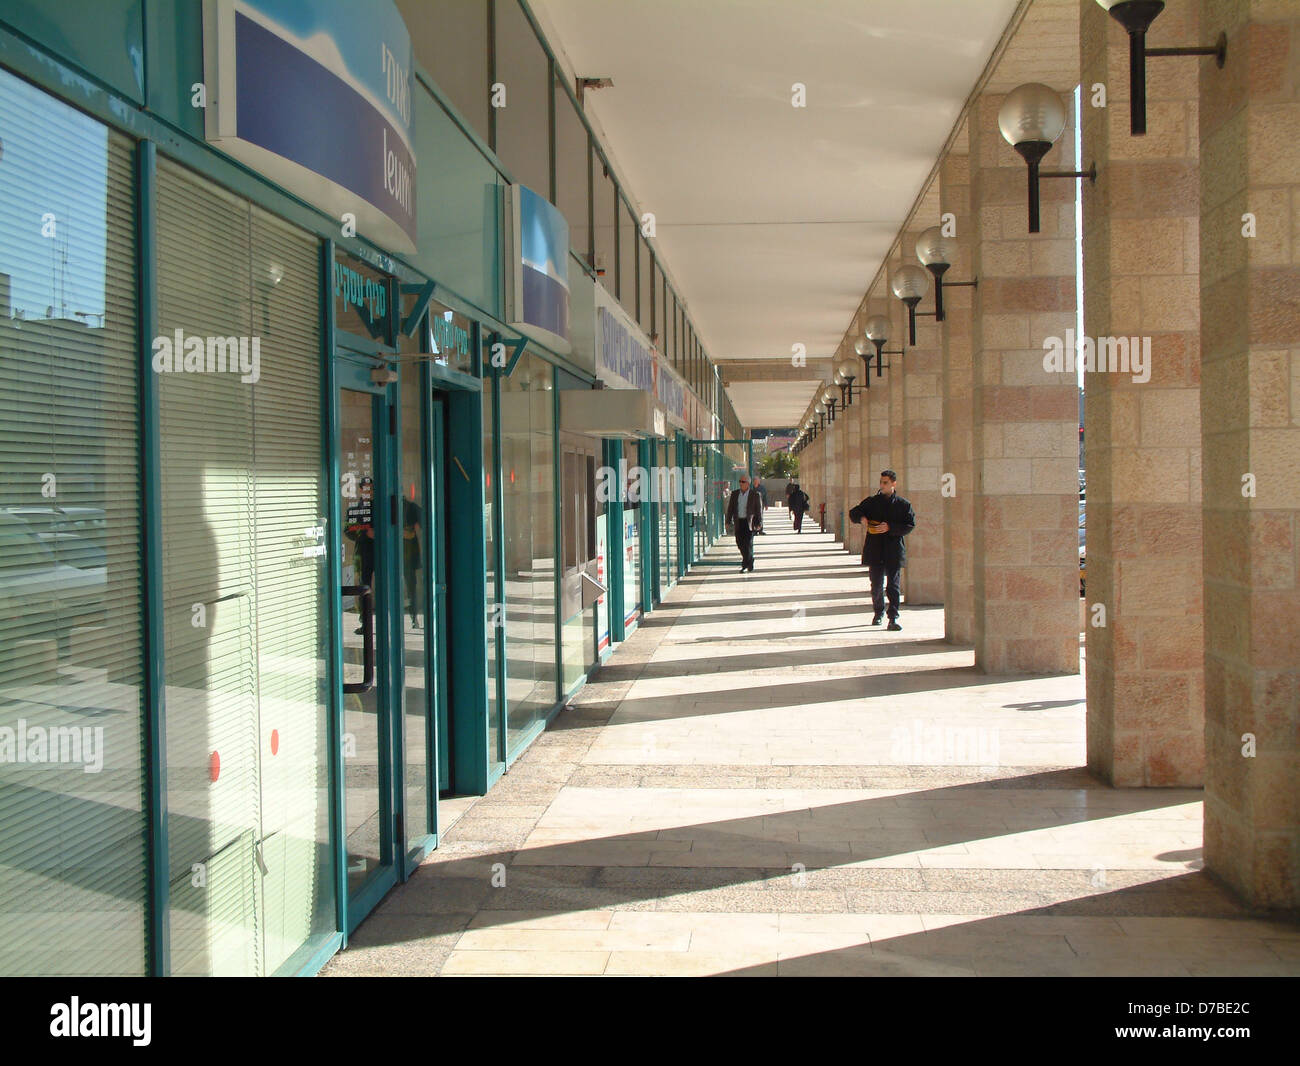 commercial arcade in givat shaul jerusalem Stock Photo